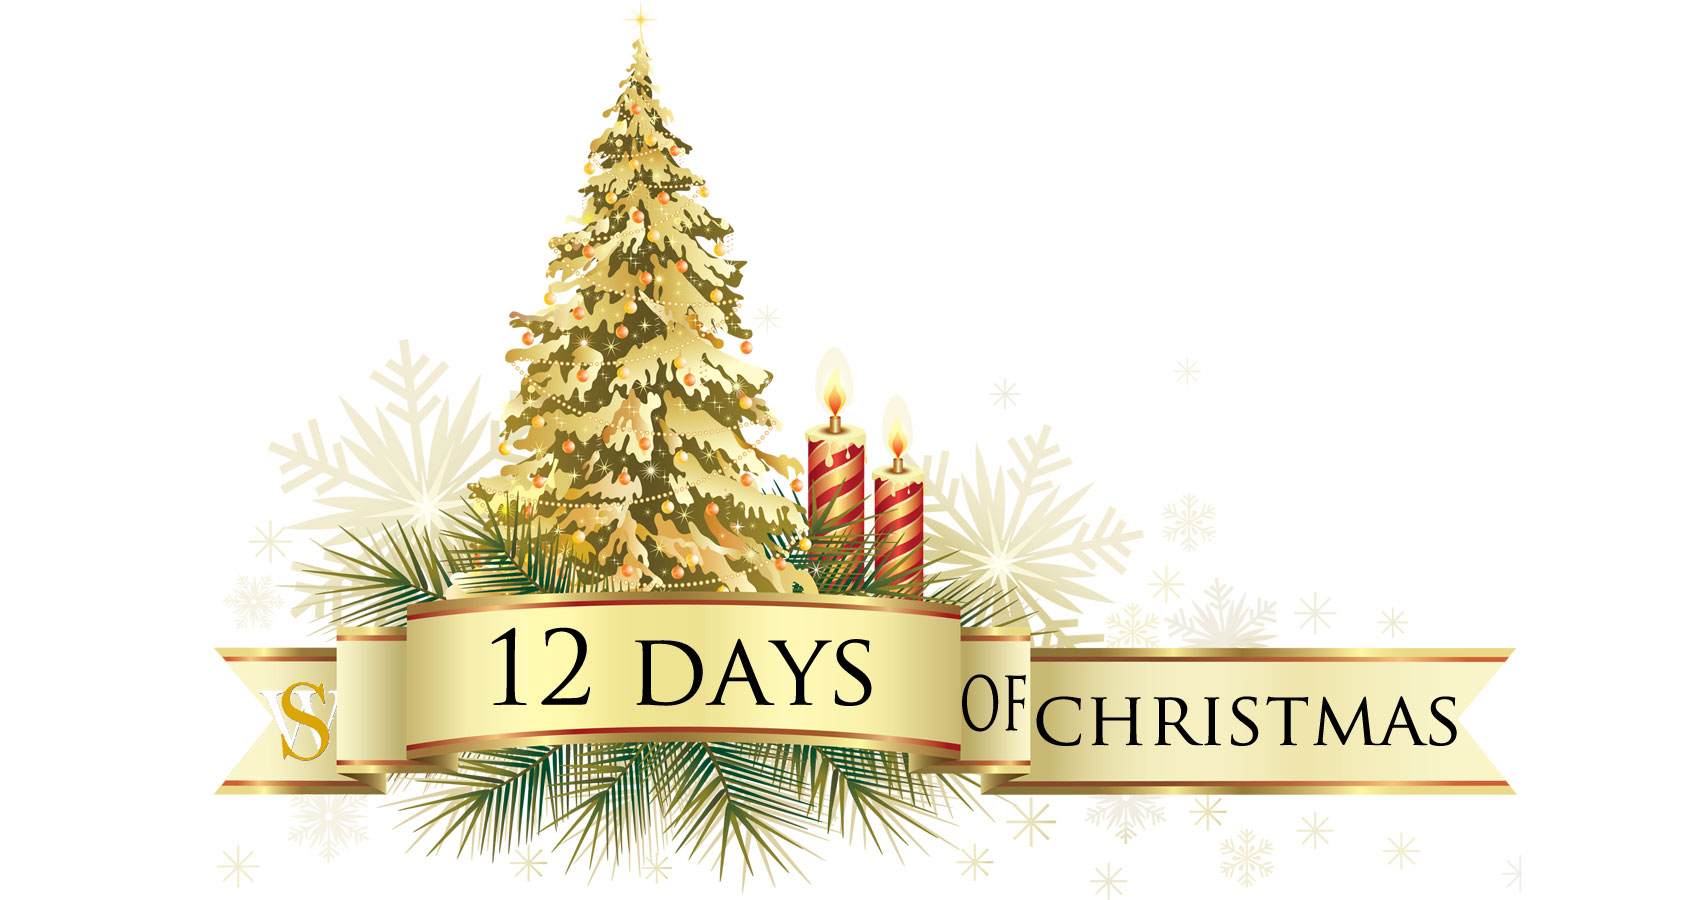 12 Days of Christmas submission at Spillwords.com